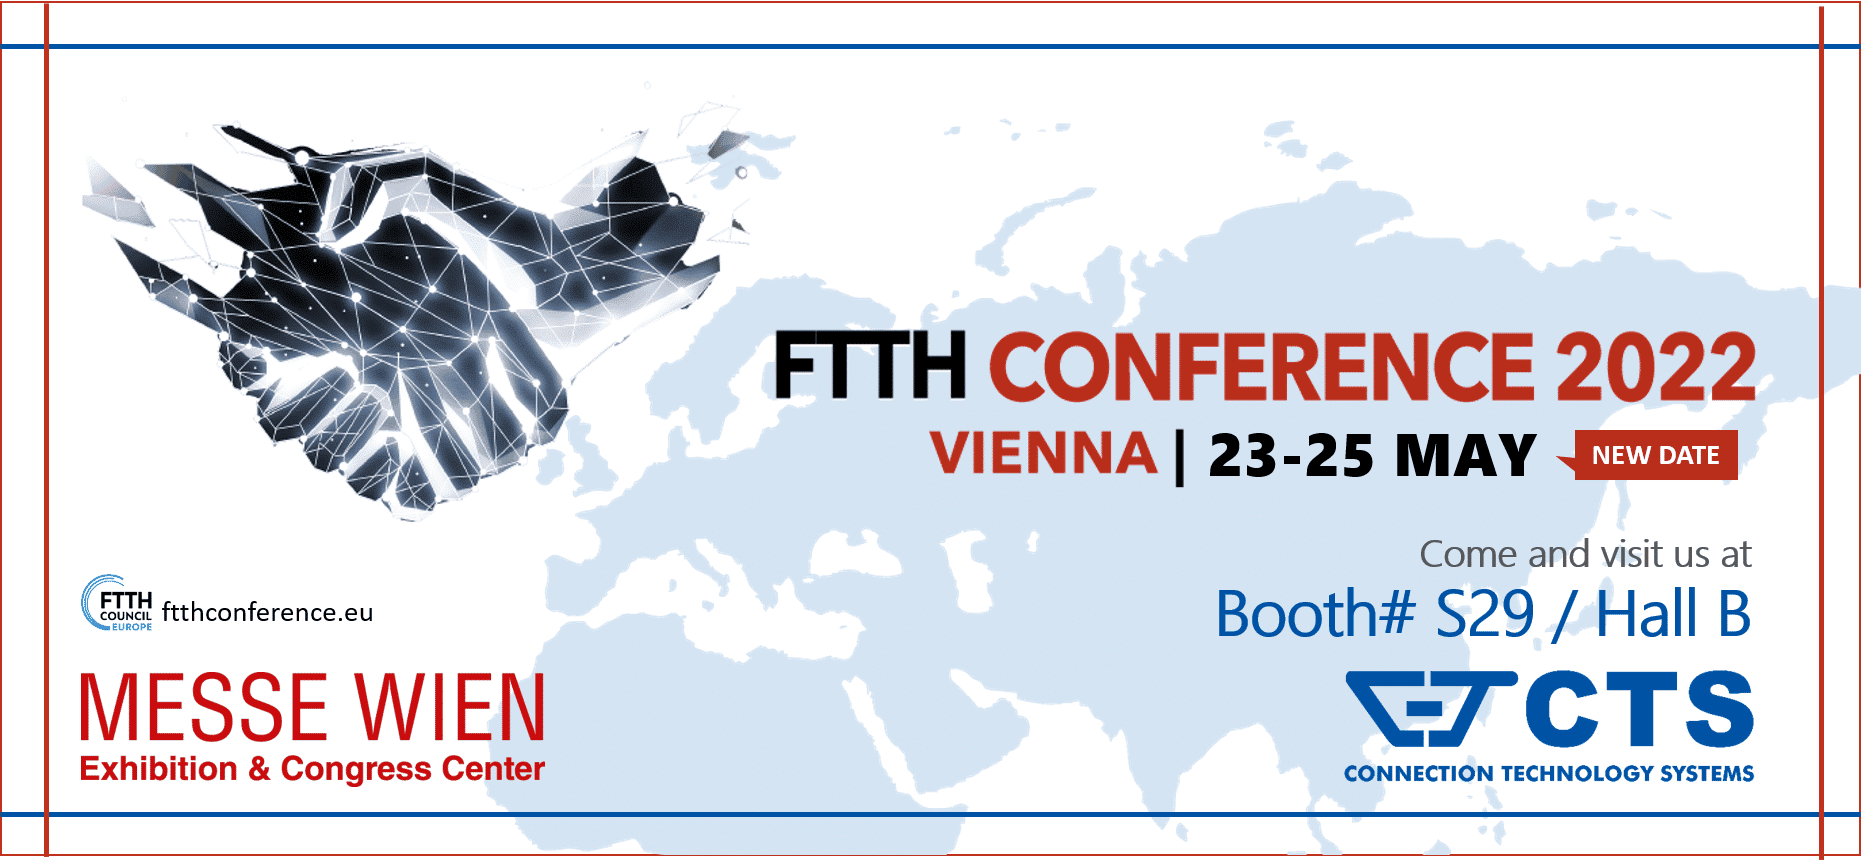 We will join the in-person FTTH Conference in Vienna, which takes place for the first time in two years!